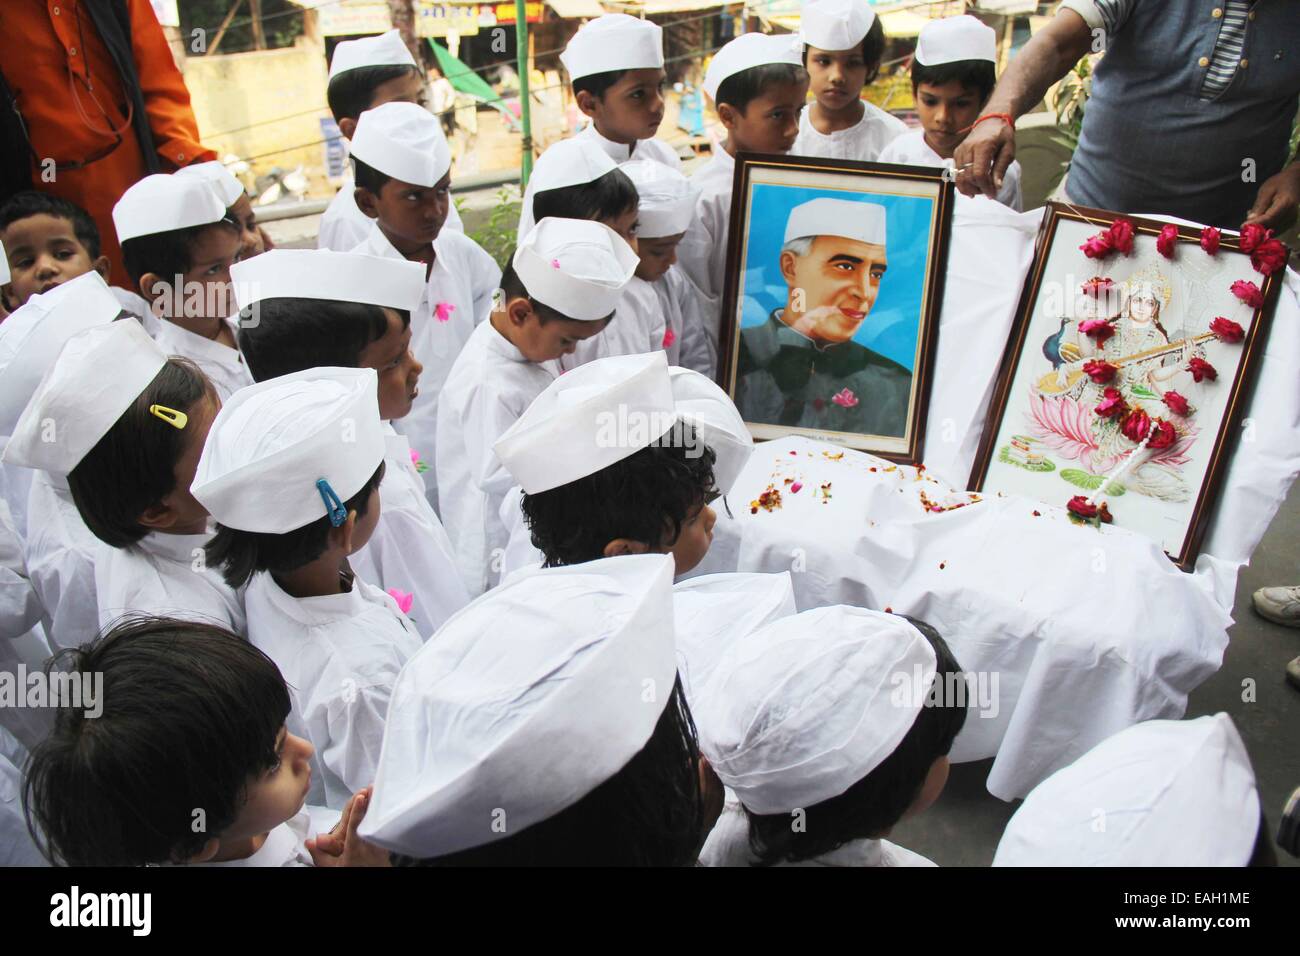 Children dressed up Chacha Nehru and pay floral tribute on the portrait of former Prime Minister Jawaharlal Nehru on the eve of his 125th birth anniversary at Allahabad. © Amar Deep/Pacific Press/Alamy Live News Stock Photo